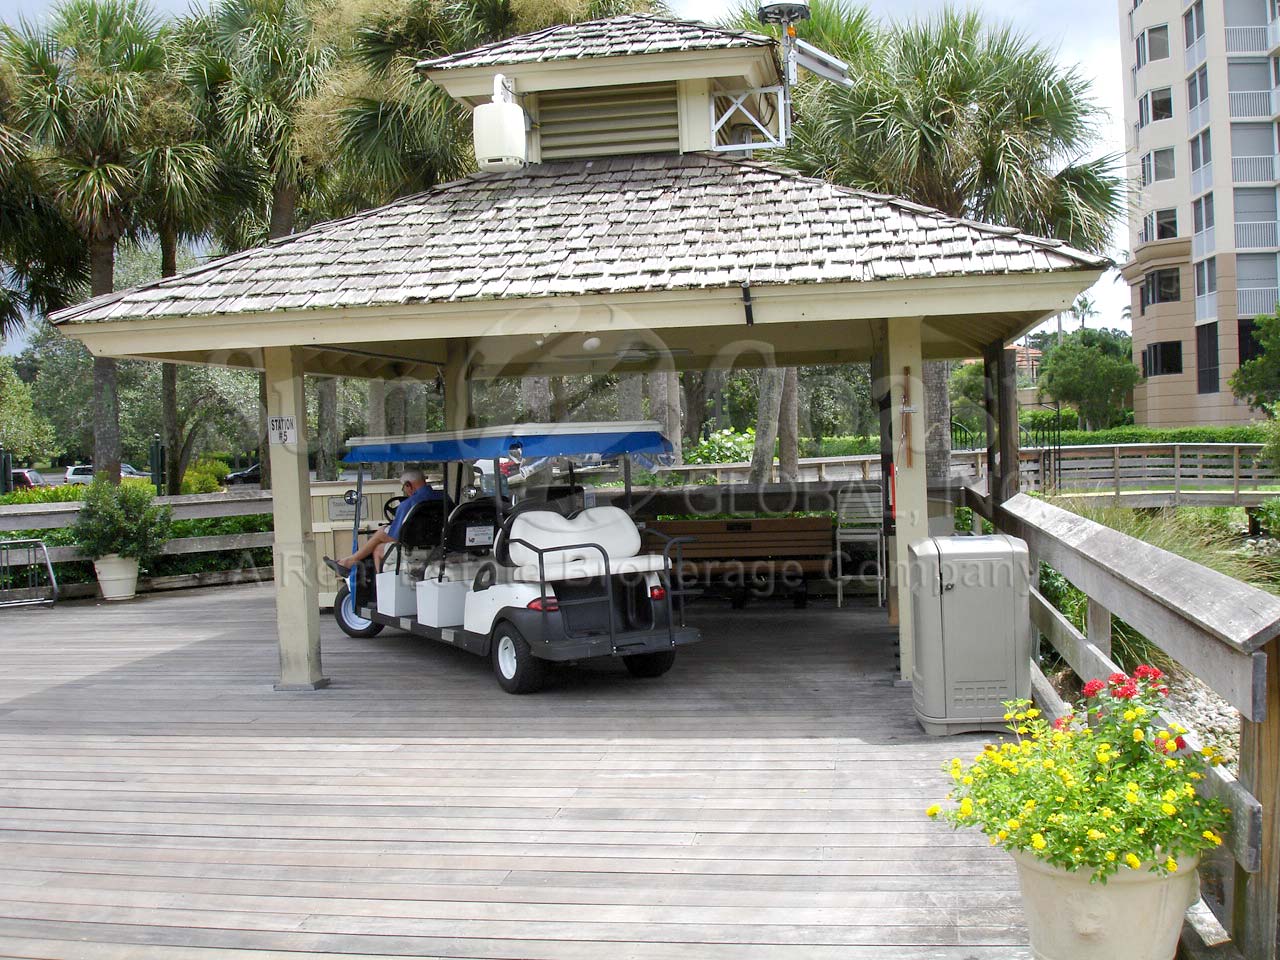 PELICAN BAY tram station and solar powered tram